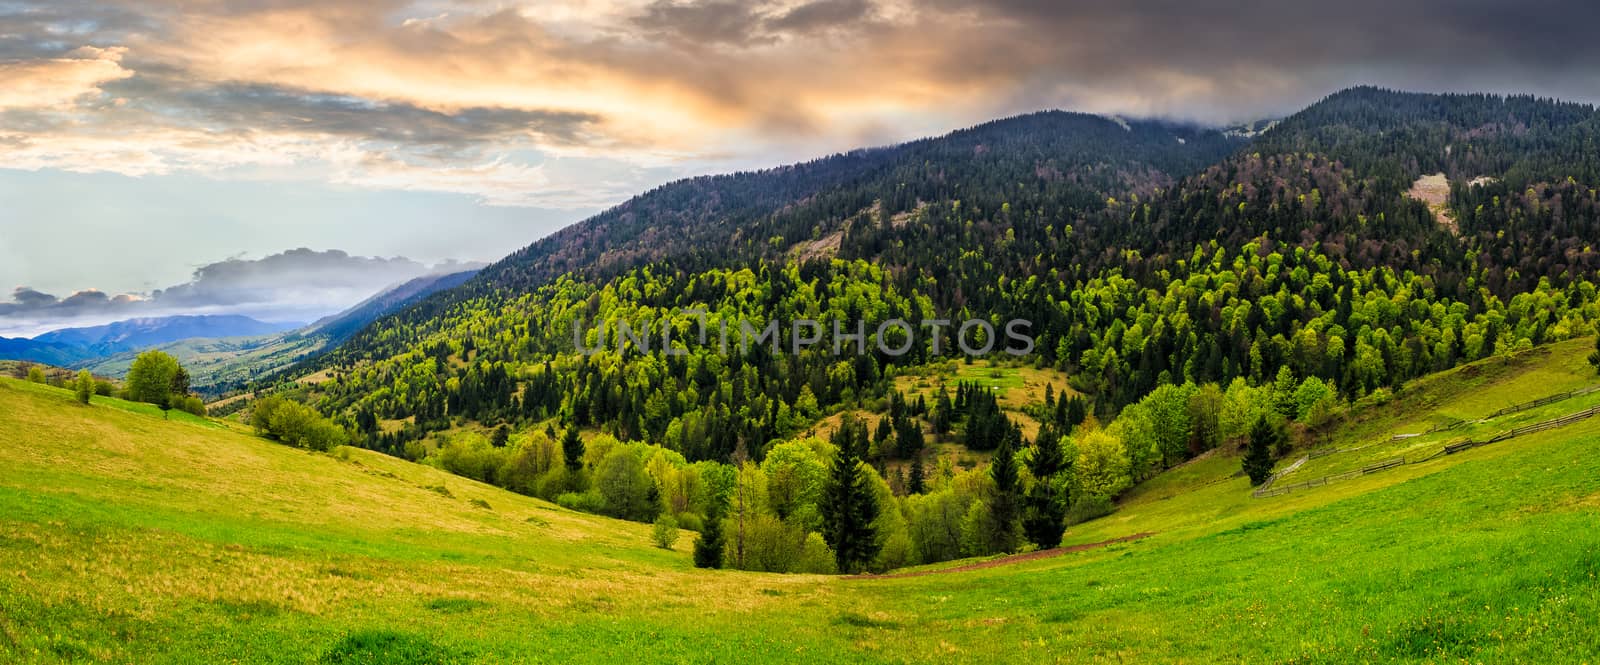 mountain landscape. hillside with trees on green grassy meadow near foggy mountains under overcast sky